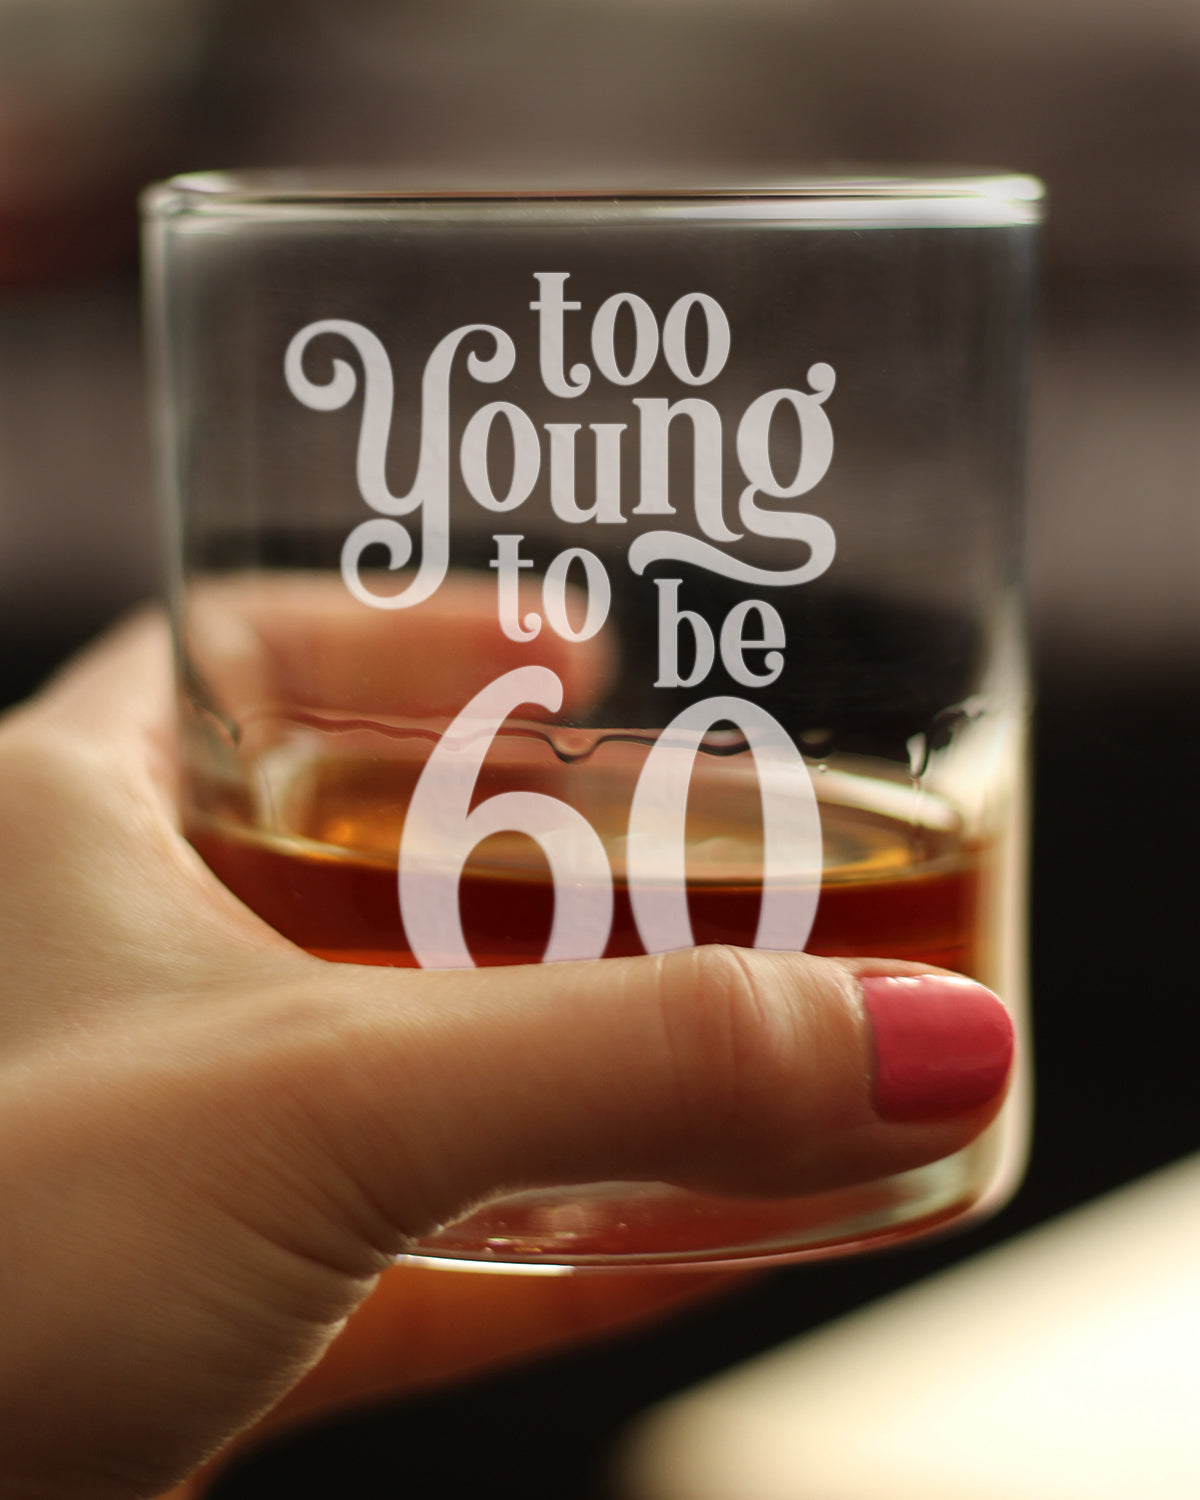 Too Young to be 60 - Funny 60th Birthday Whiskey Rocks Glass Gifts for Men &amp; Women Turning 60 - Whisky Drinking Tumbler